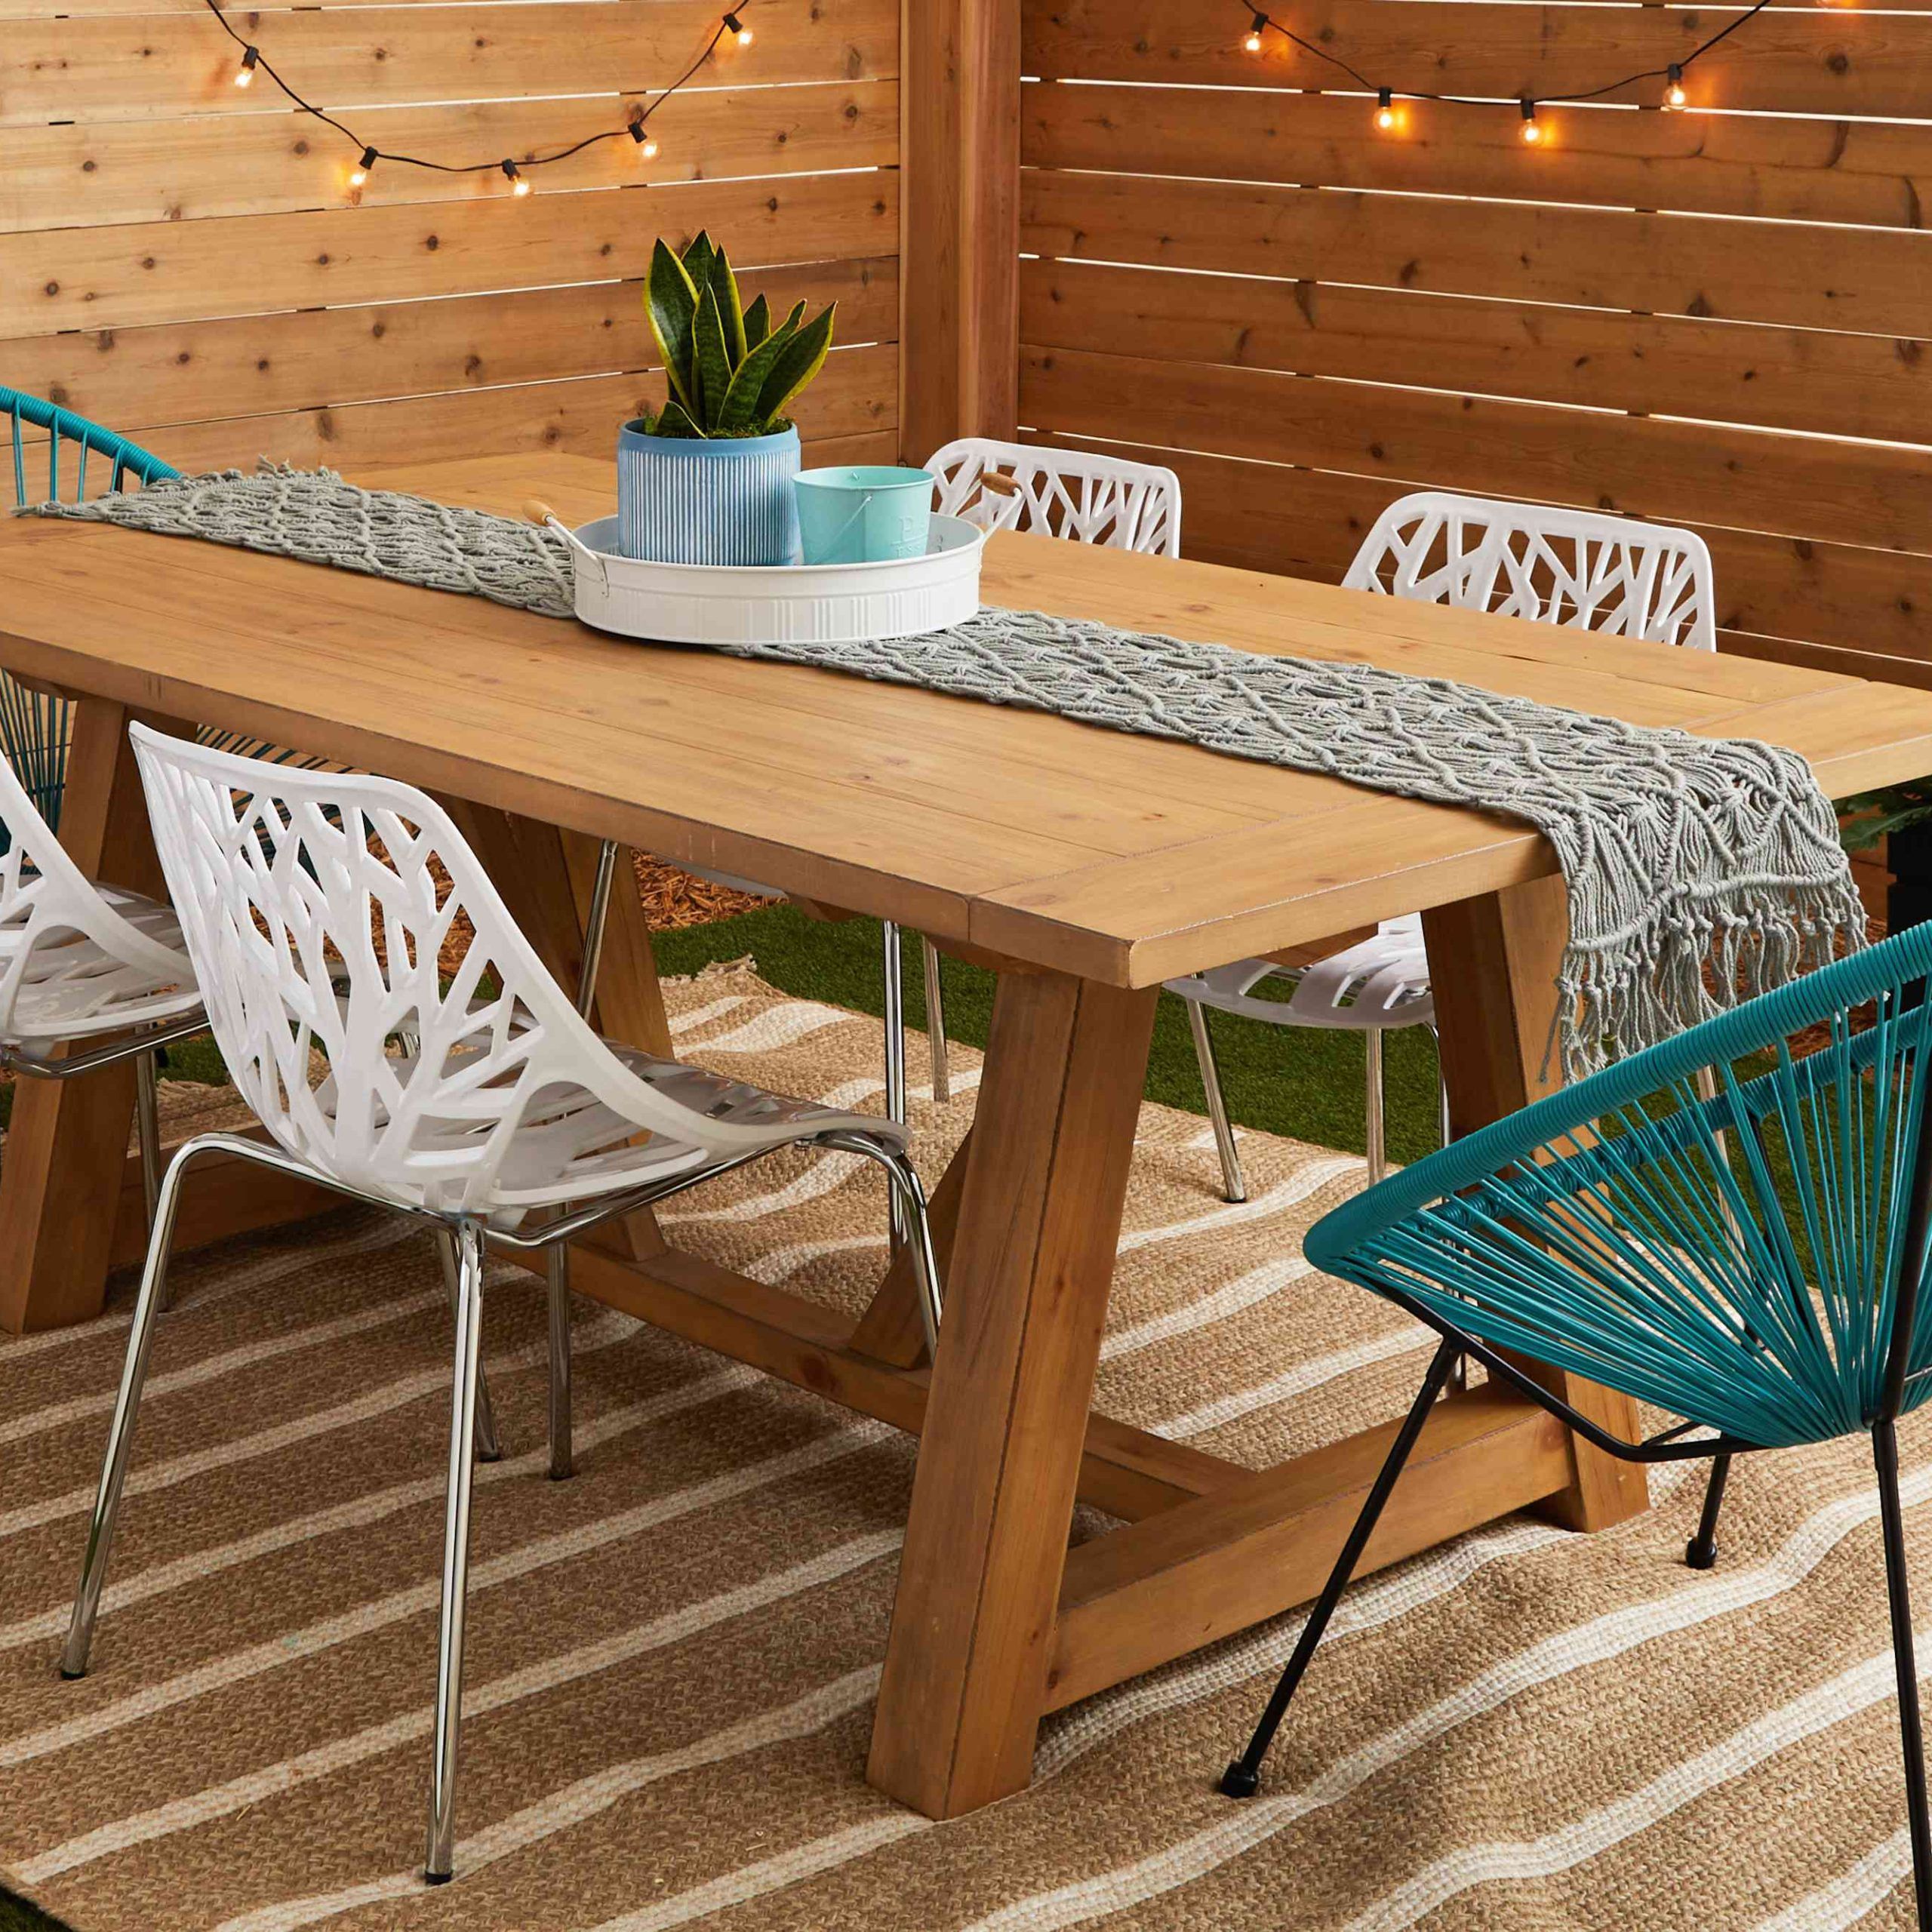 18 Diy Outdoor Table Plans Intended For Outdoor Coffee Tables With Storage (View 12 of 15)